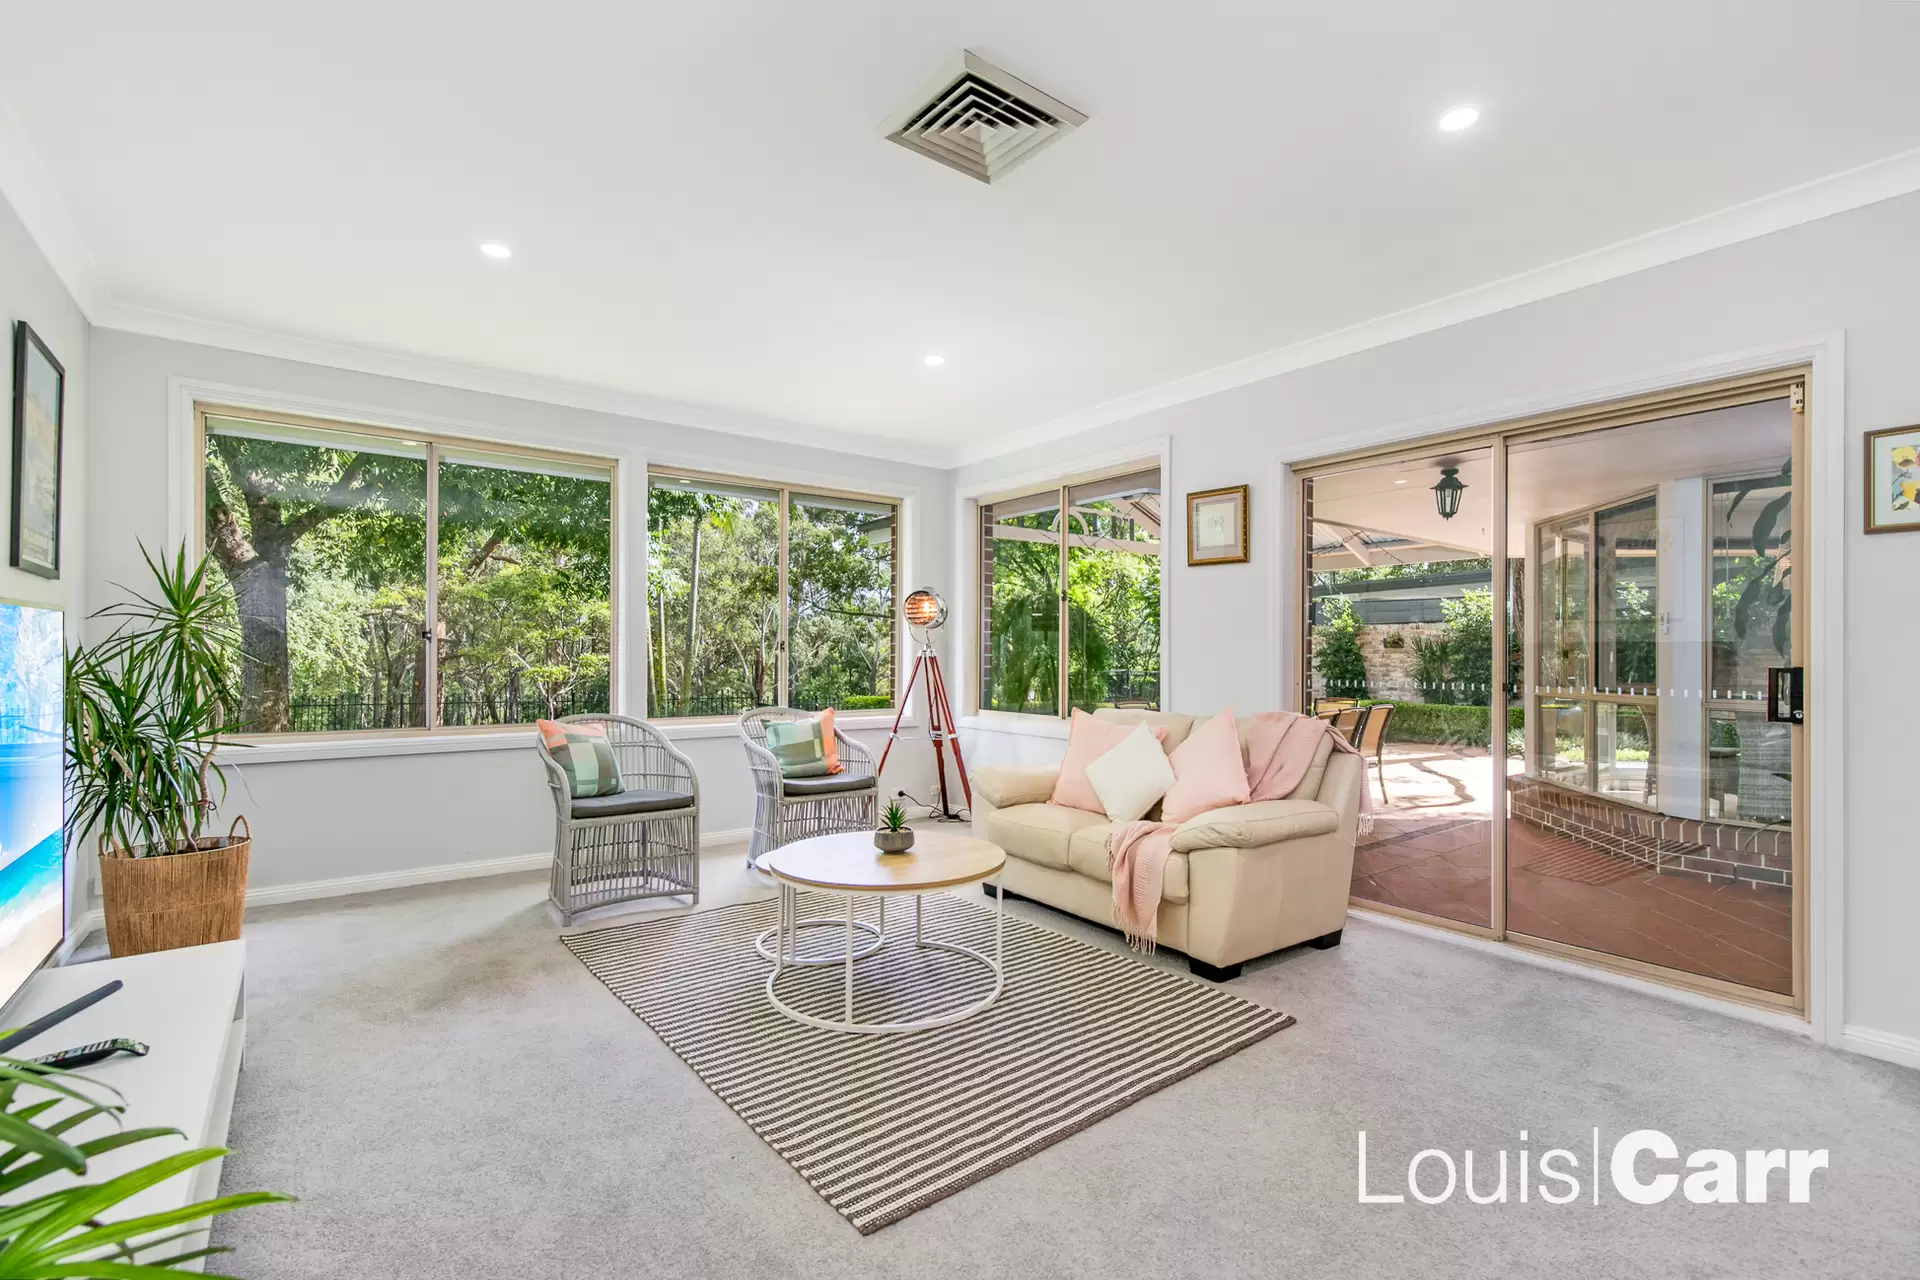 Photo #7: 15 Grangewood Place, West Pennant Hills - For Sale by Louis Carr Real Estate